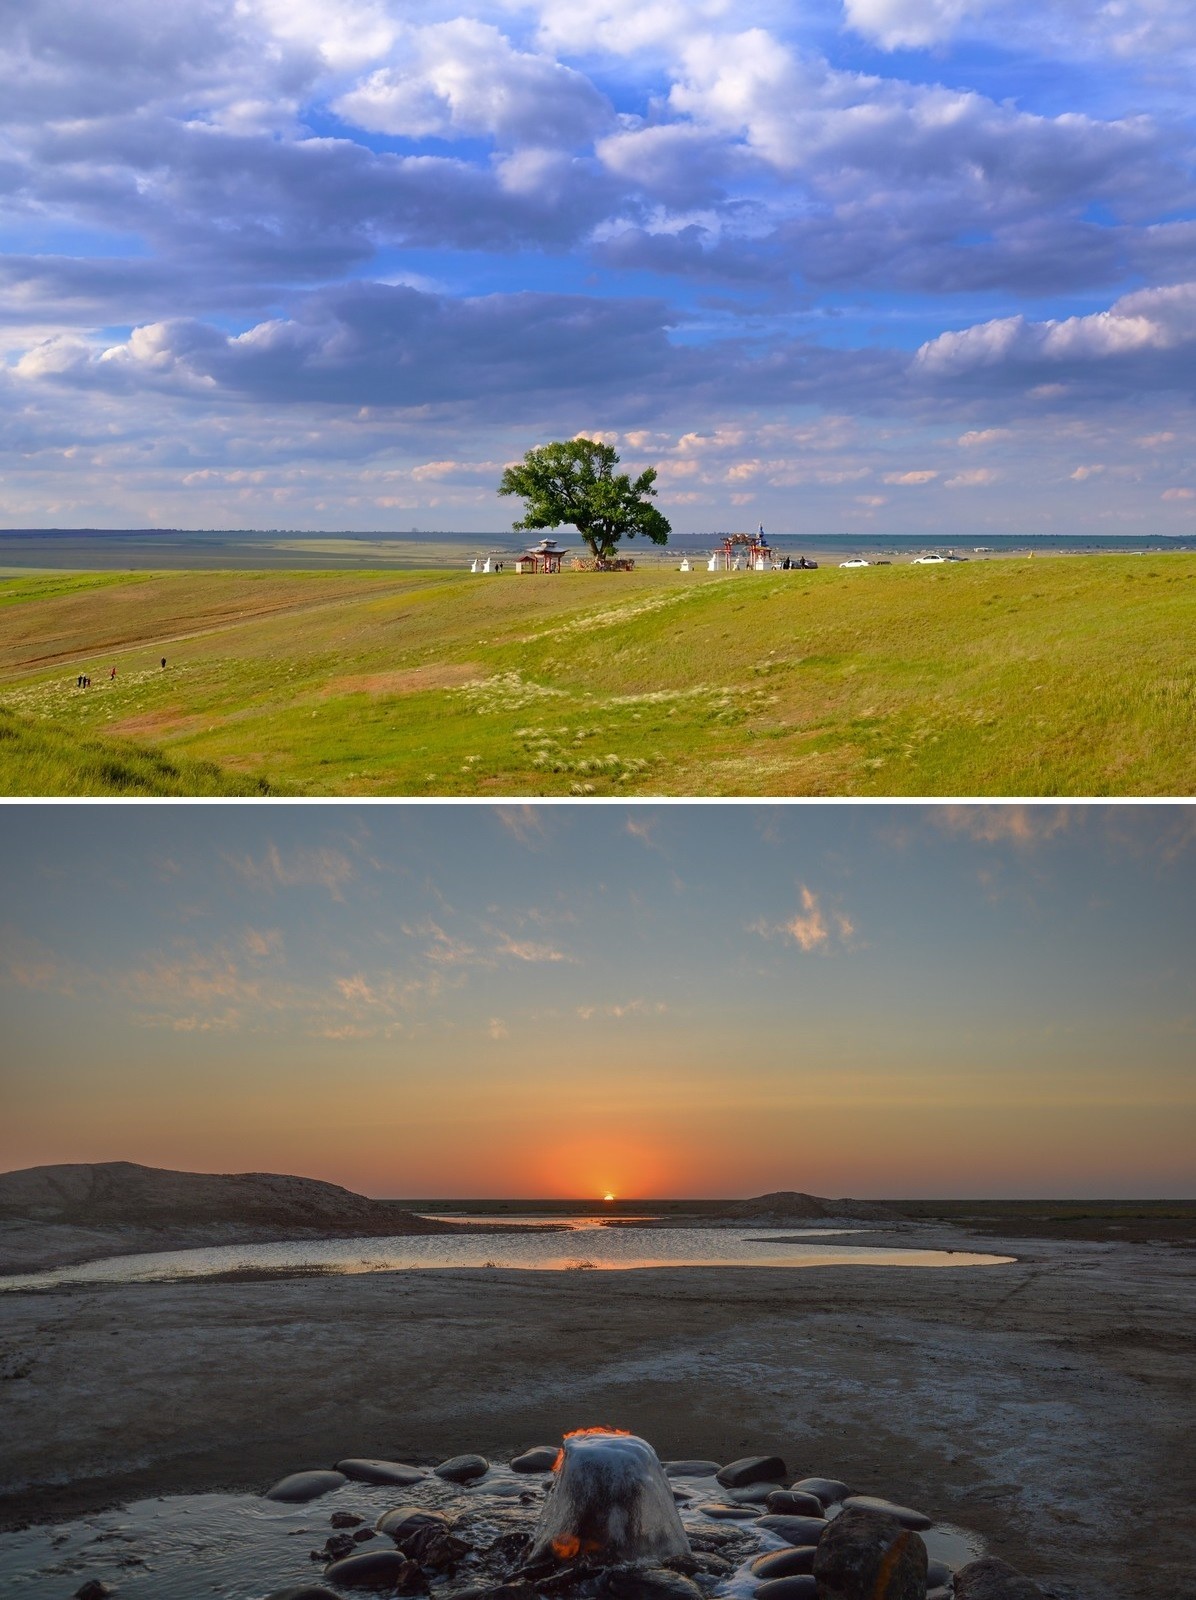 Planted by a Buddhist monk in 1846, the ‘Lone Poplar’ dominates the Kalmyk steppe. On the second photo: a source of salt water that also emits gas, which makes it possible to ignite it and to pass one’s hand over it without getting burned. 